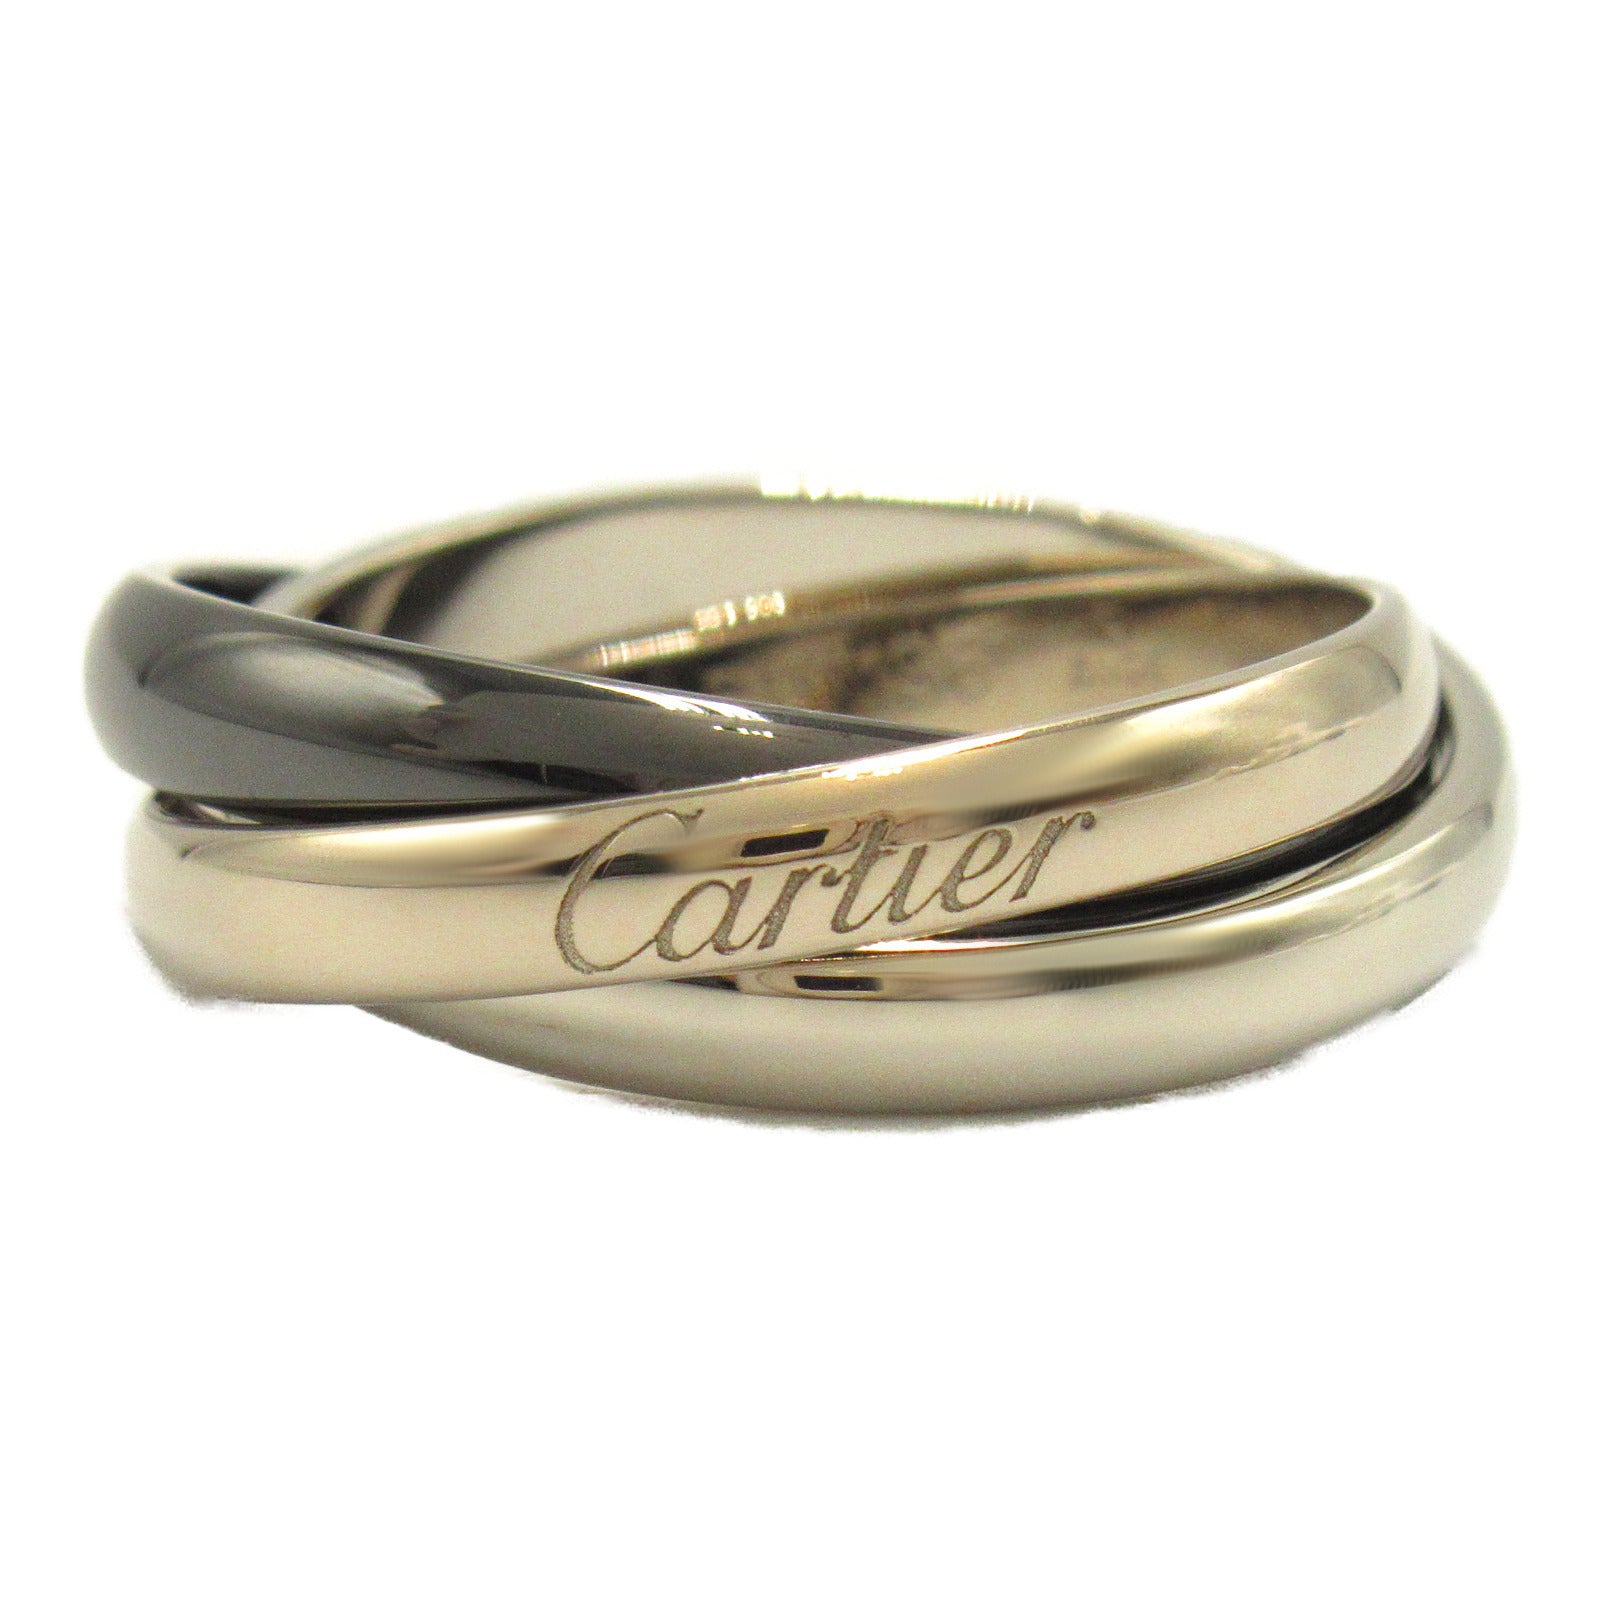 Cartier Cartier Trinity Ring Ring Jewelry K18WG (White G) Ceramic   Black/Silver Rings